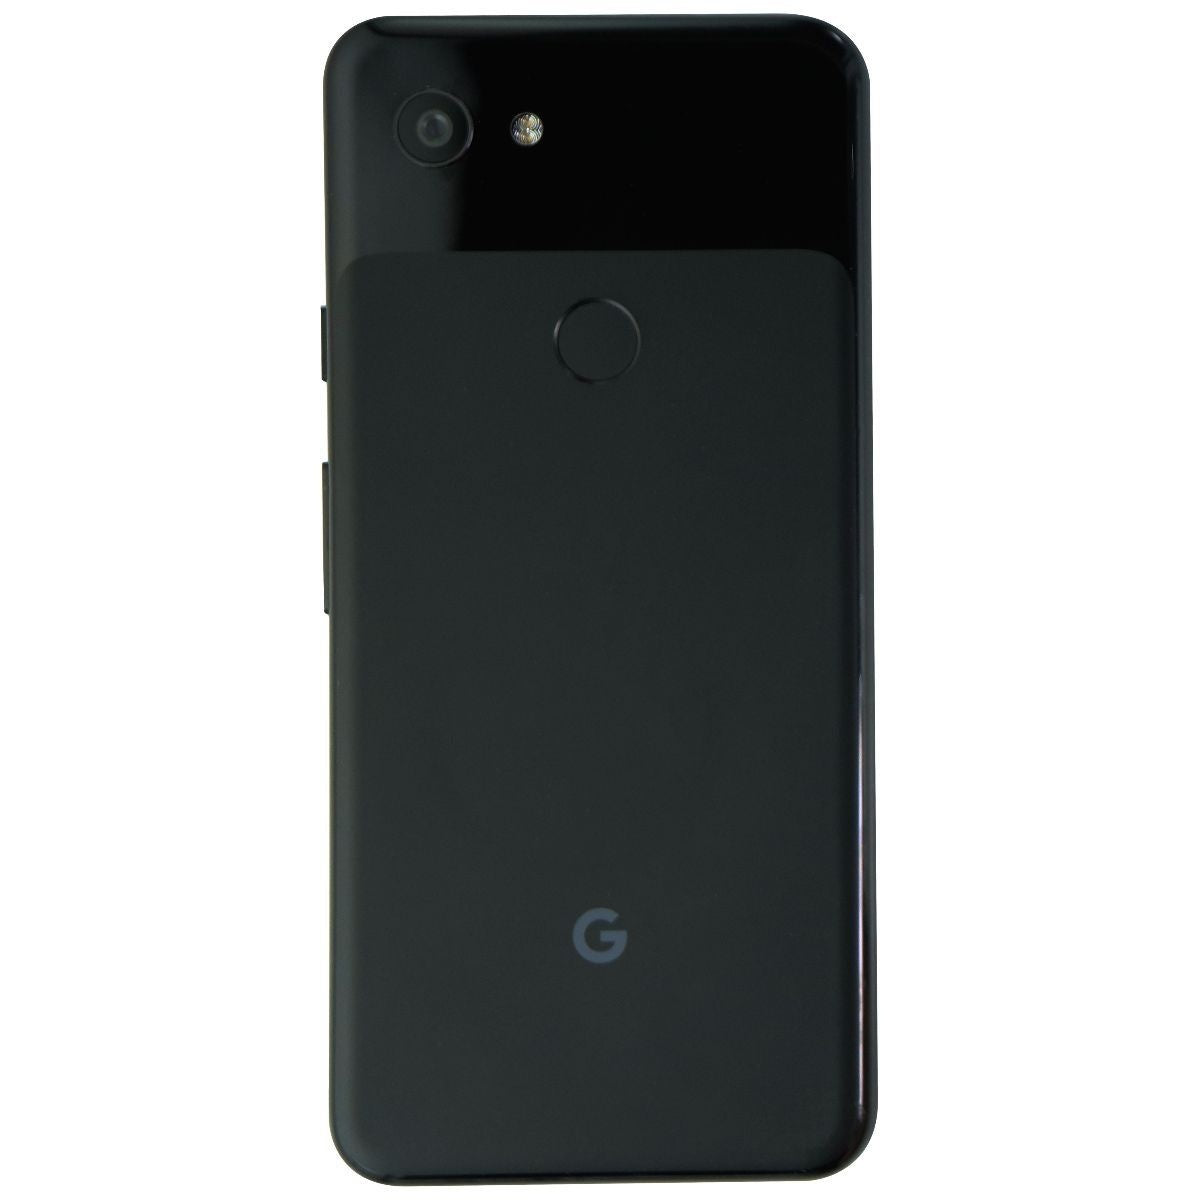 Google Pixel 3a (5.6-inch) Smartphone (G020) Unlocked - 64GB / Just Black Cell Phones & Smartphones Google    - Simple Cell Bulk Wholesale Pricing - USA Seller